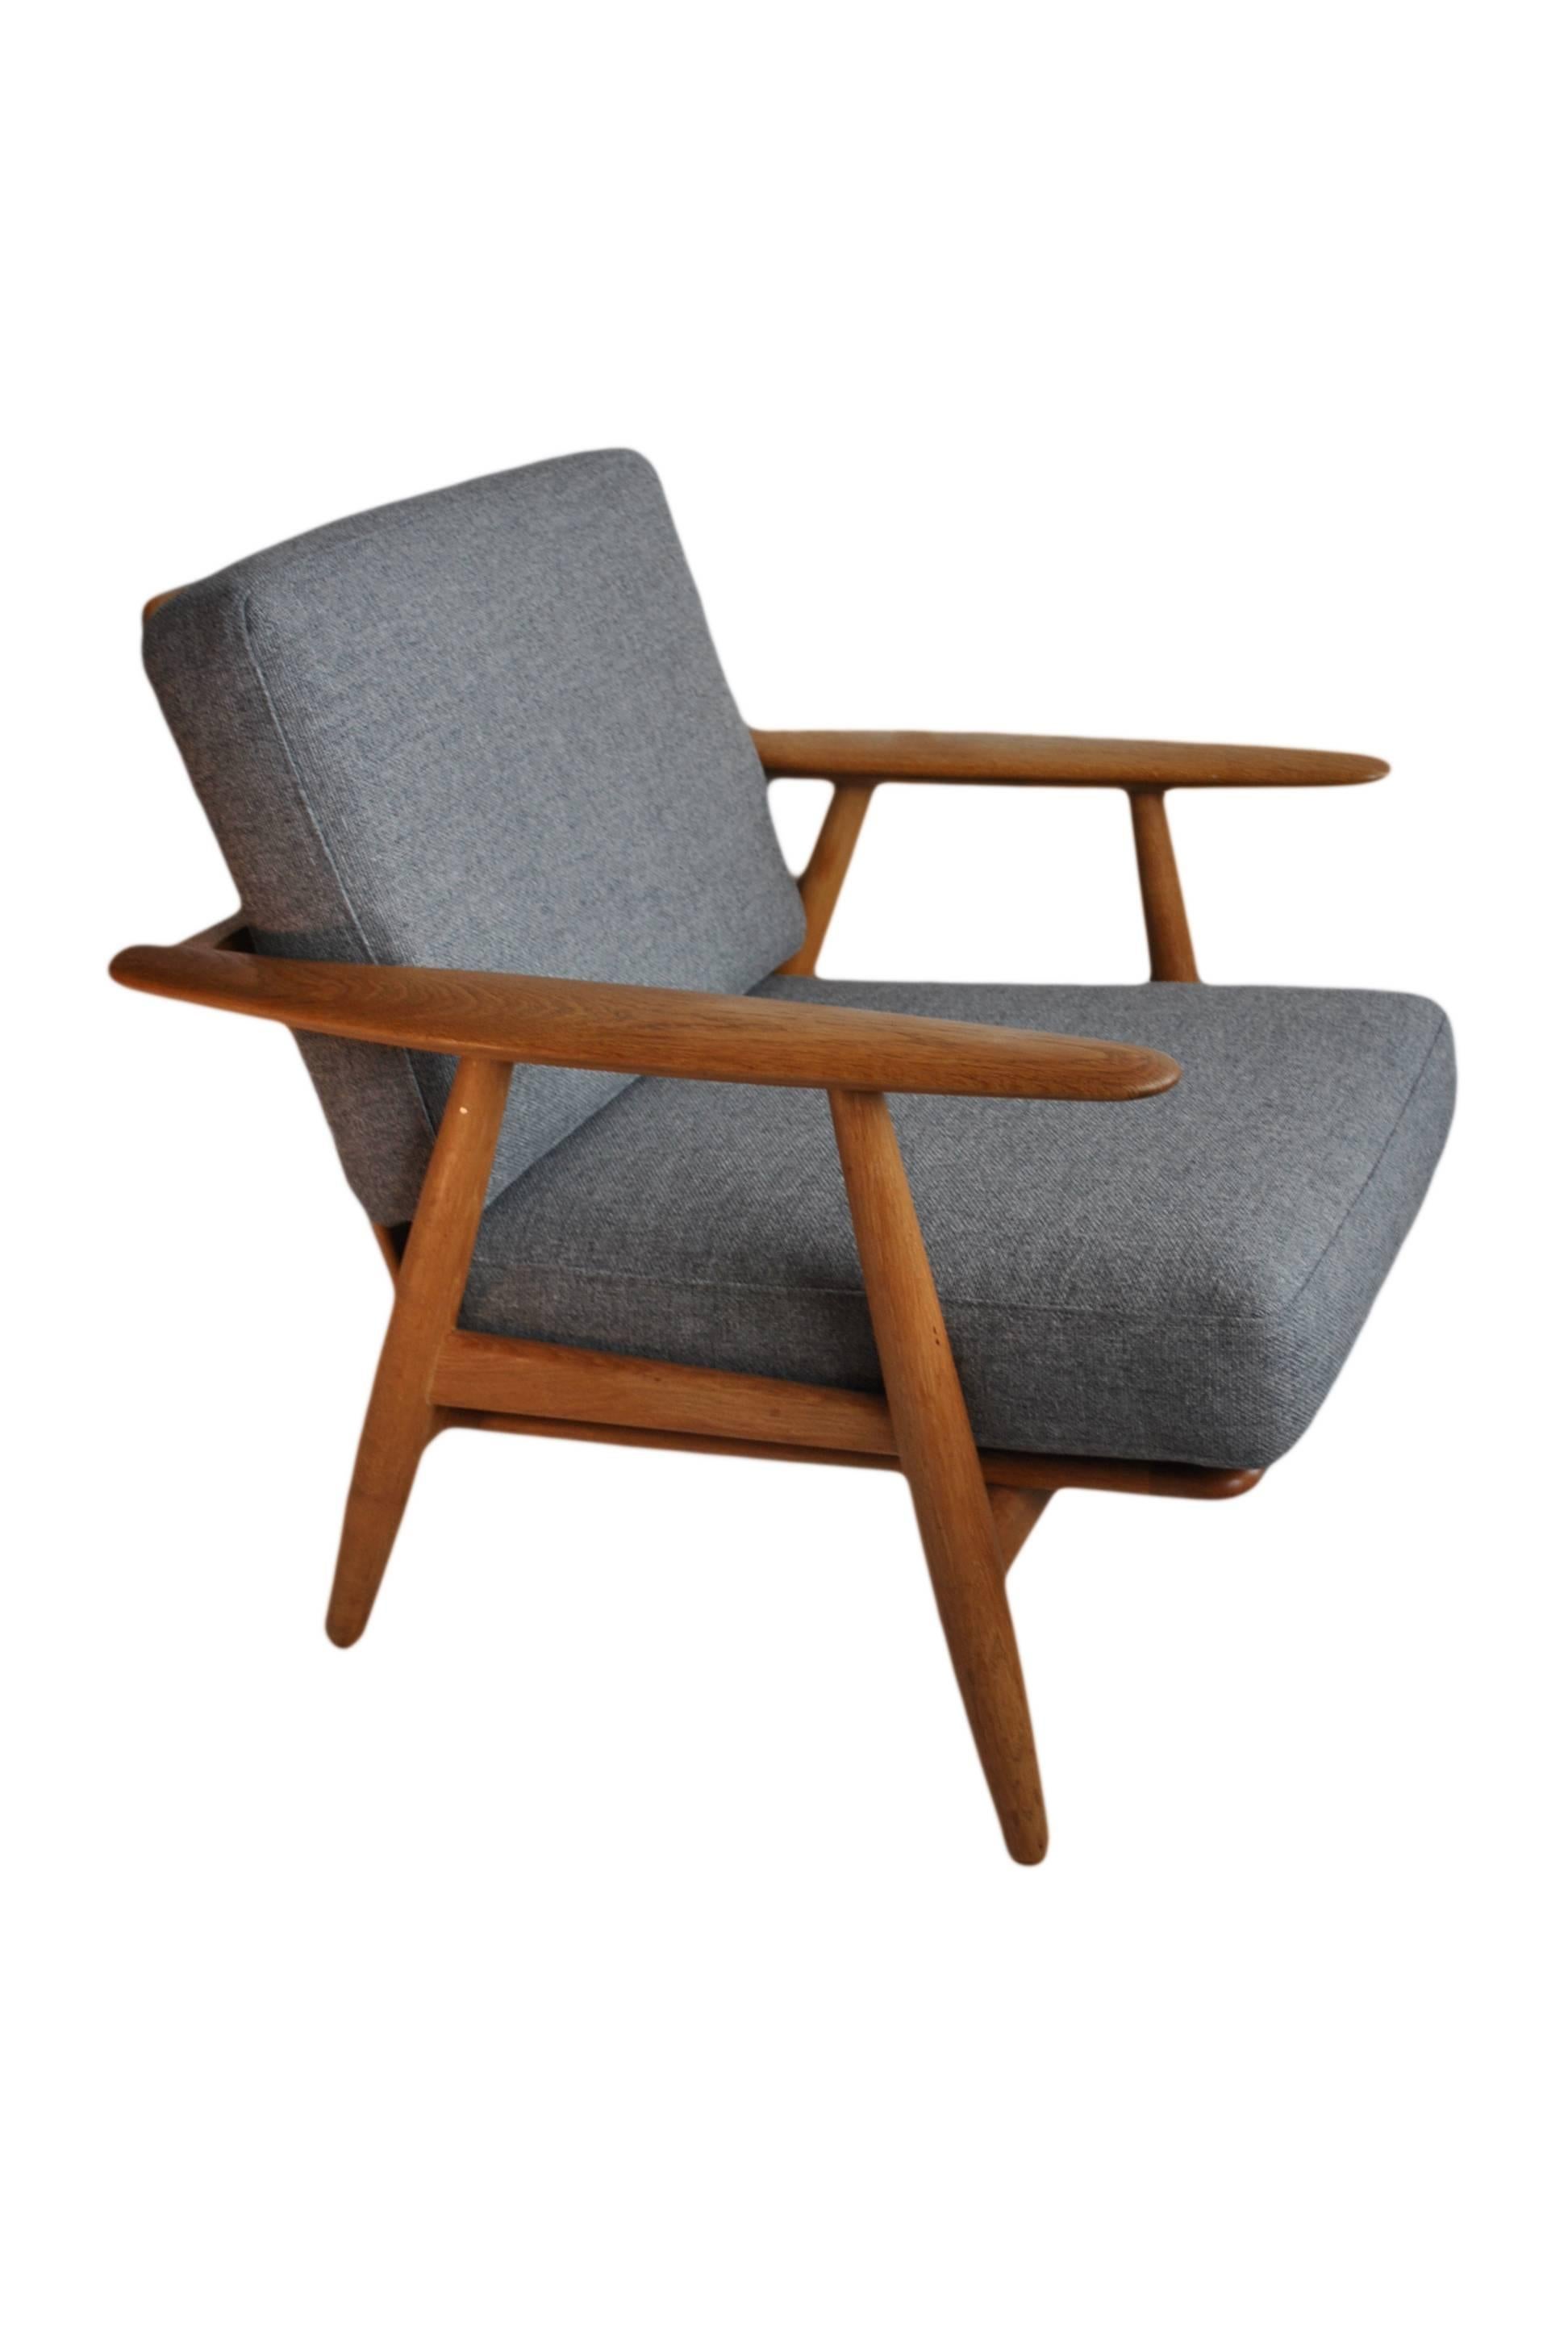 Lovely oak version of Hans J Wegner cigar chair model GE240. Produced by Getama, Denmark in the late 1950s. Great example with new wool weave upholstery.